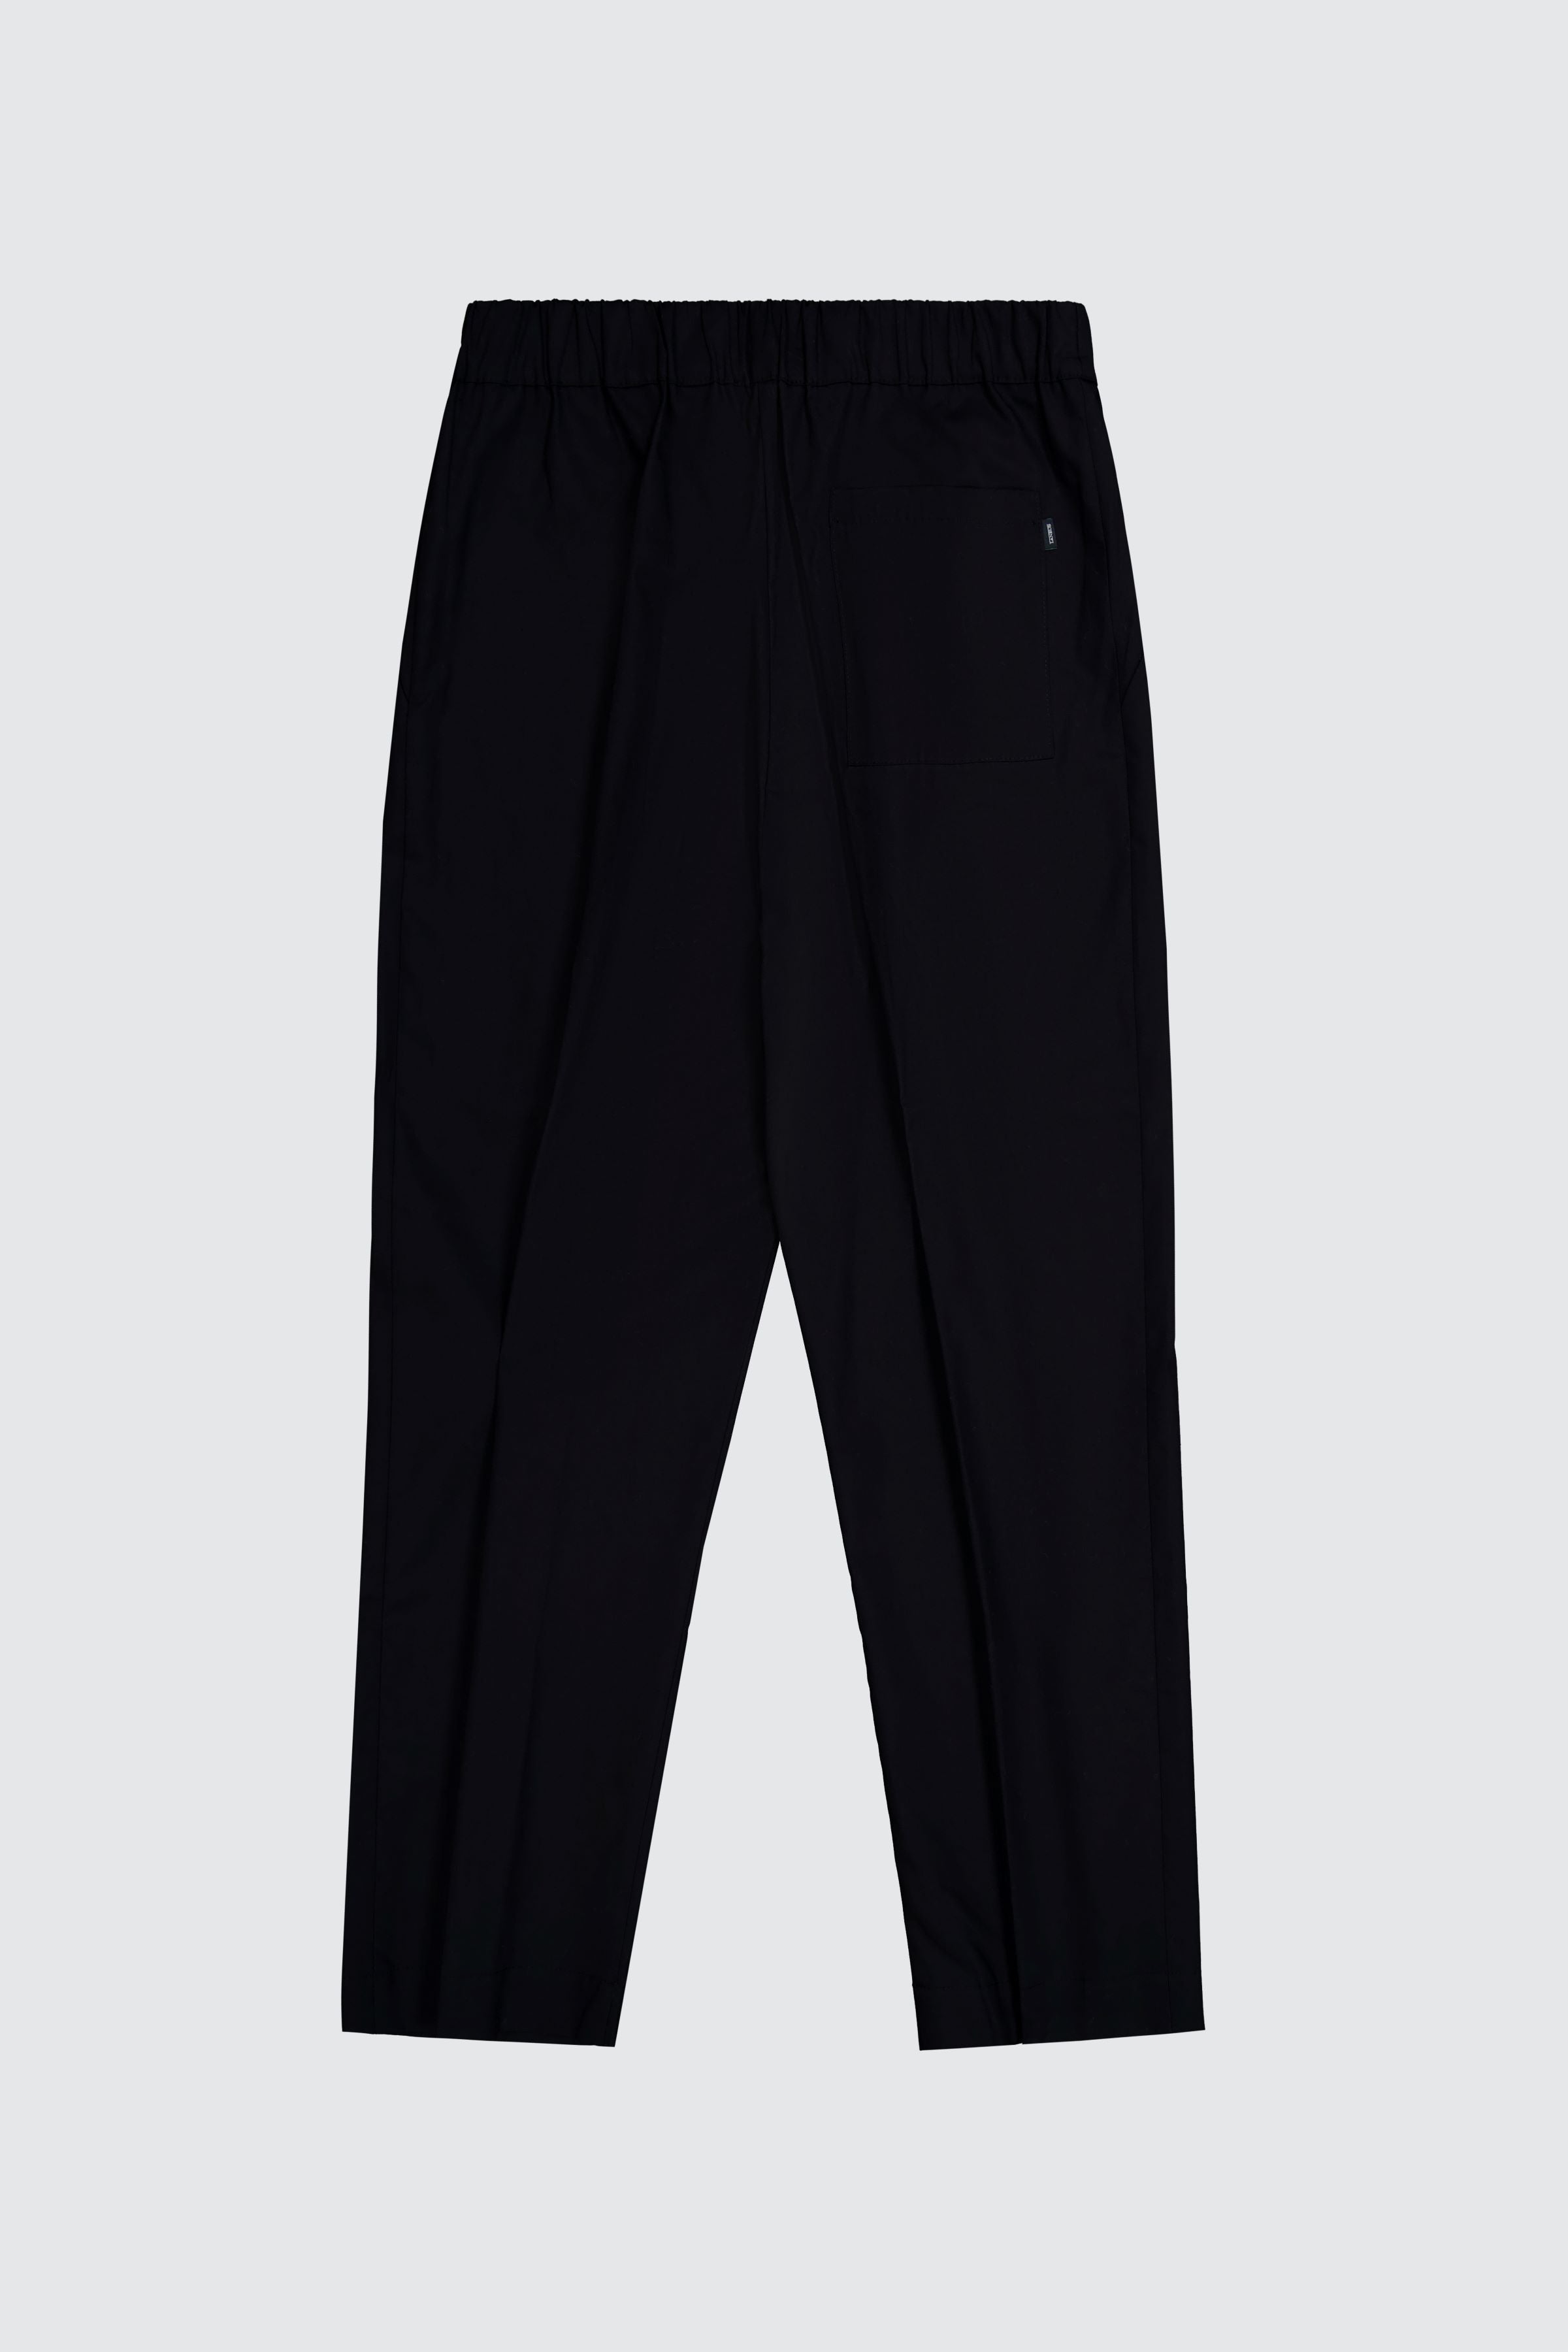 Laneus black trousers with oversize fit